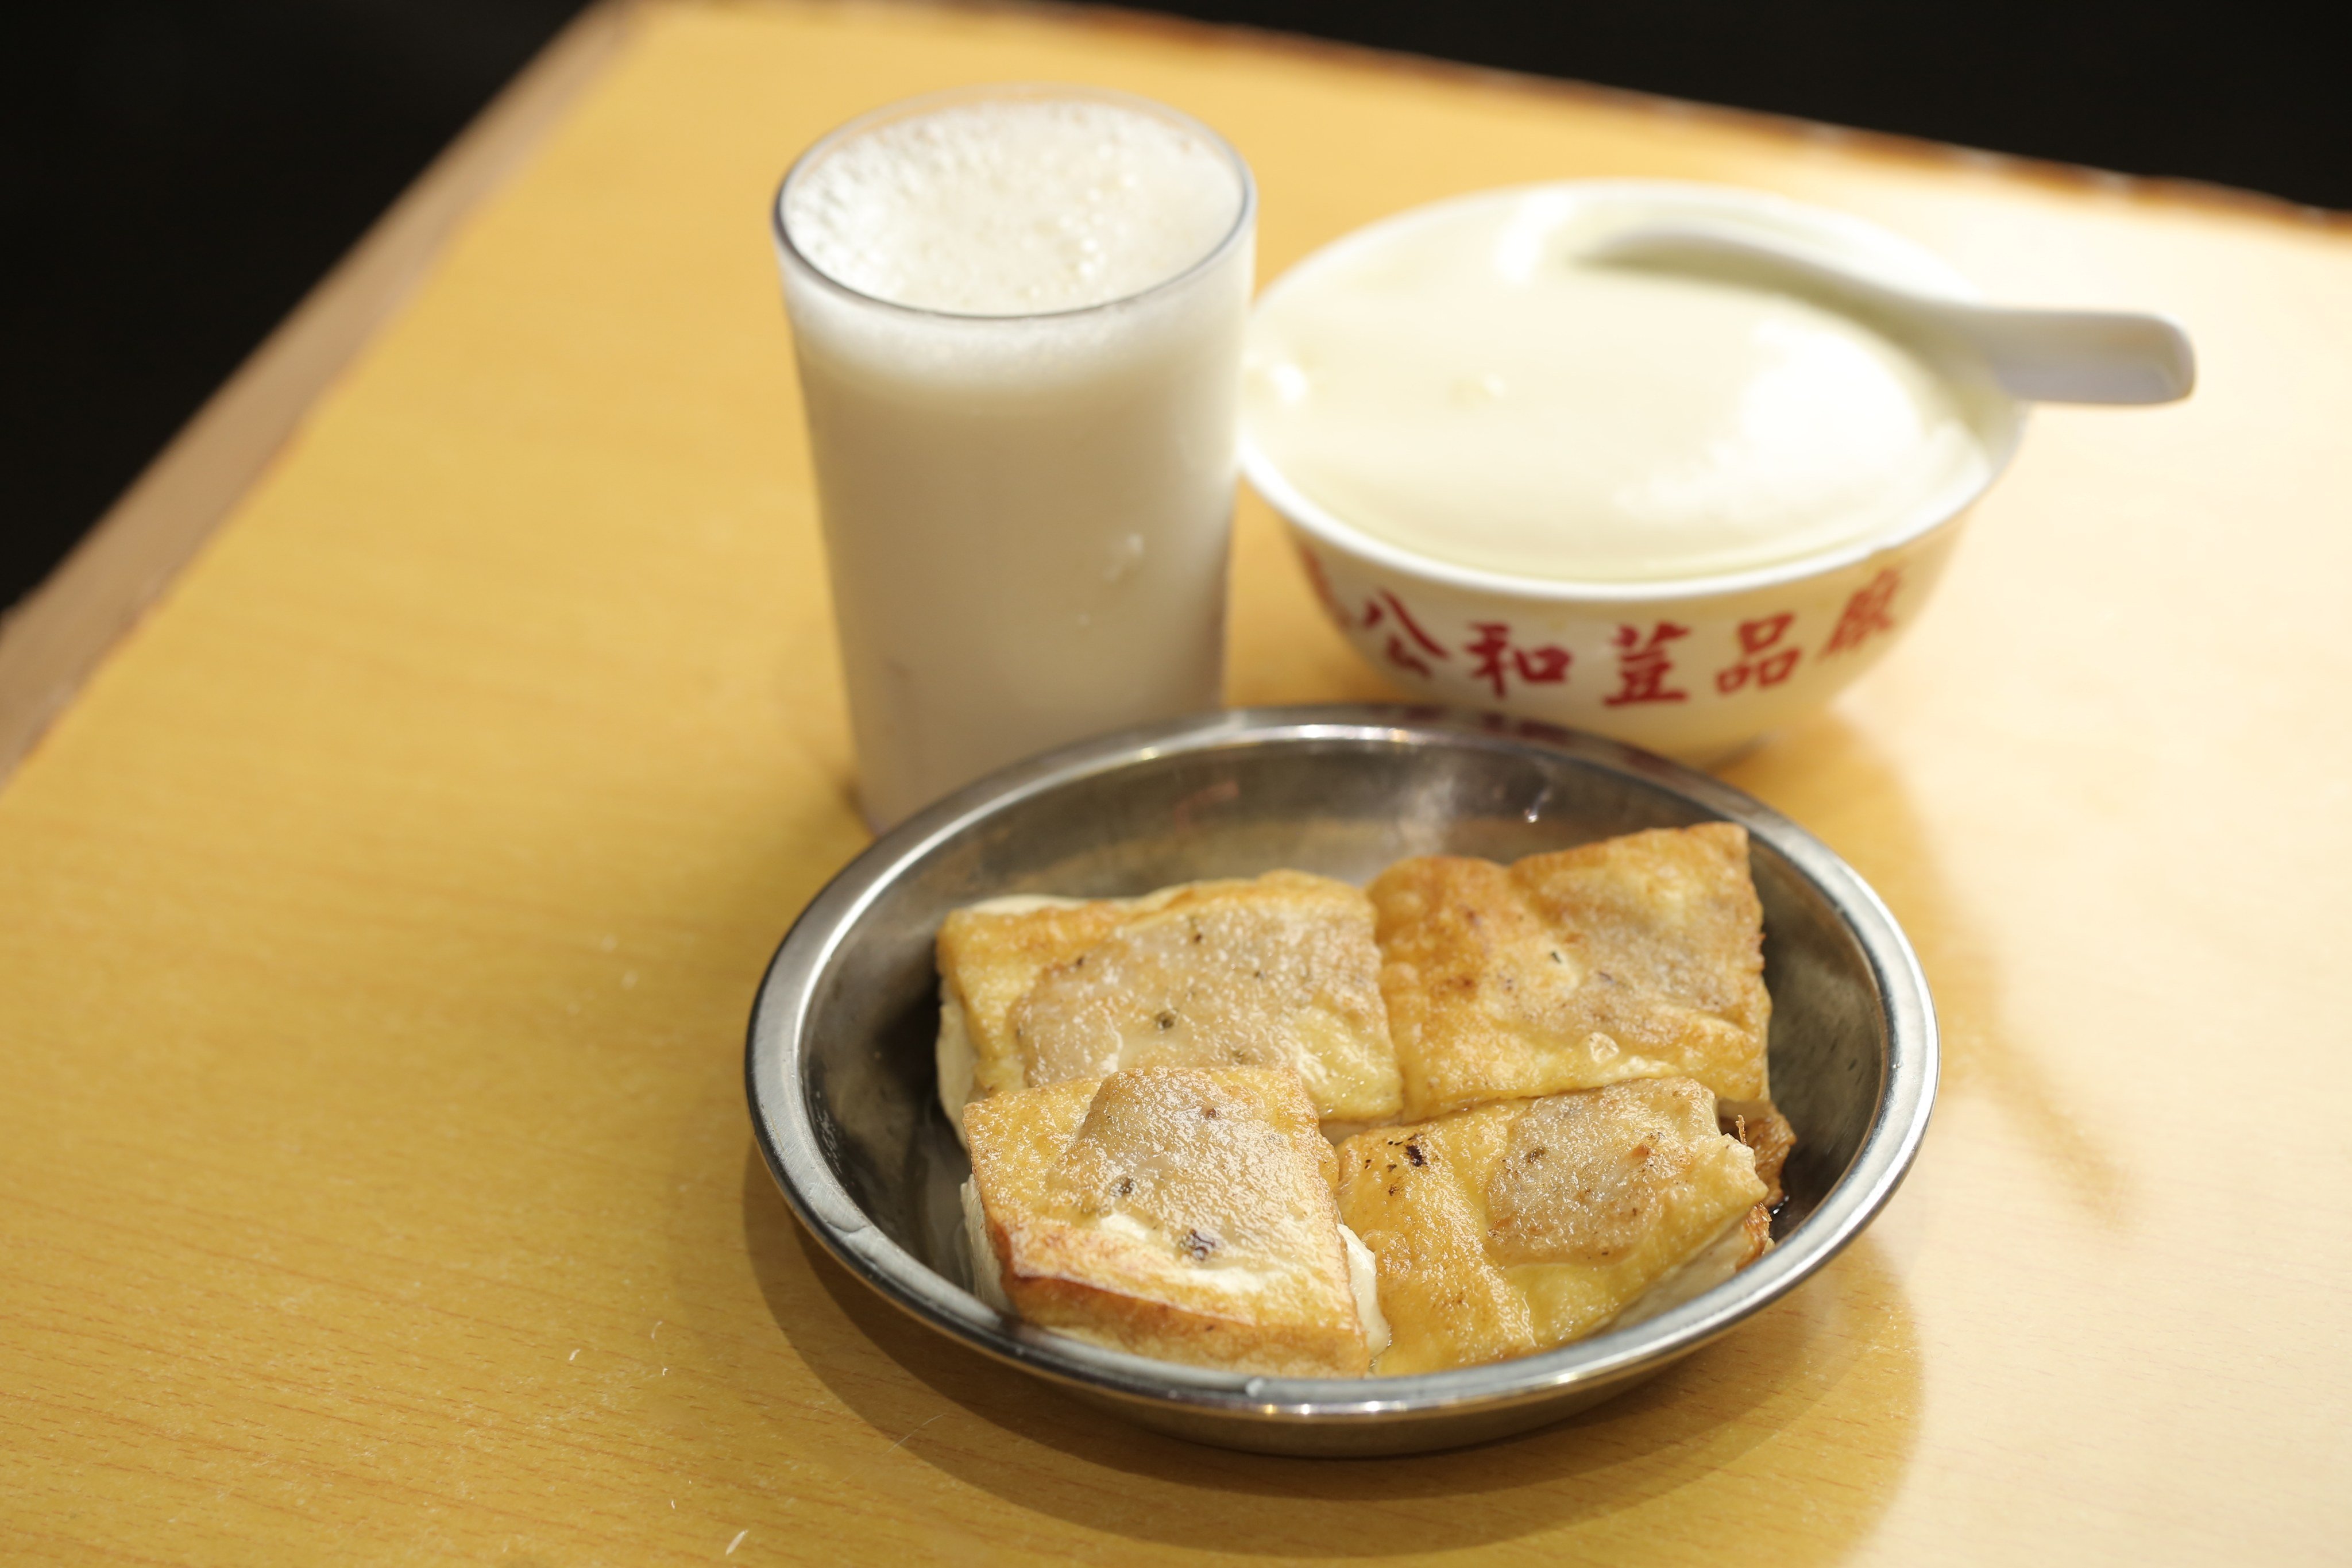 Soybean products include tofu, tofu pudding and soy milk. Photo: SCMP